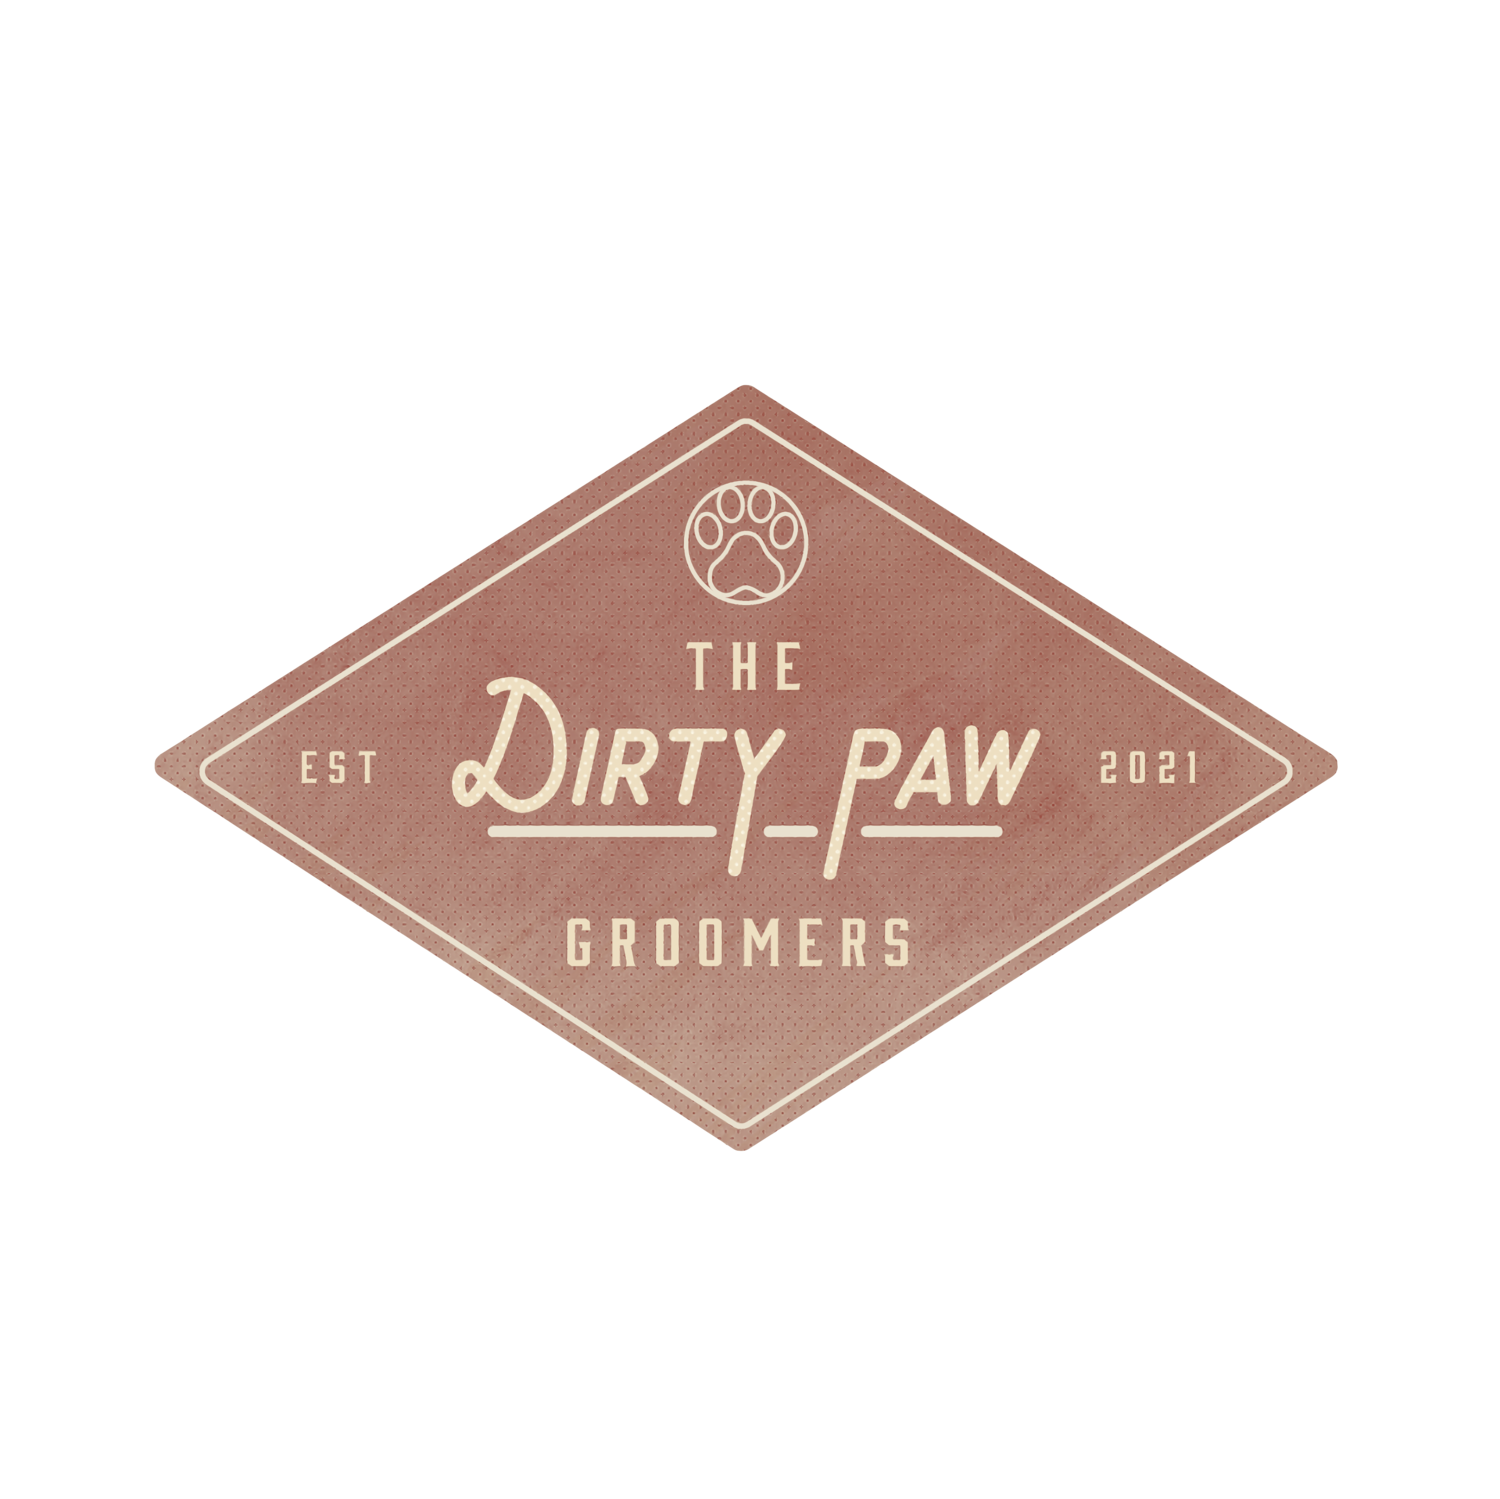 The Dirty Paw Groomers